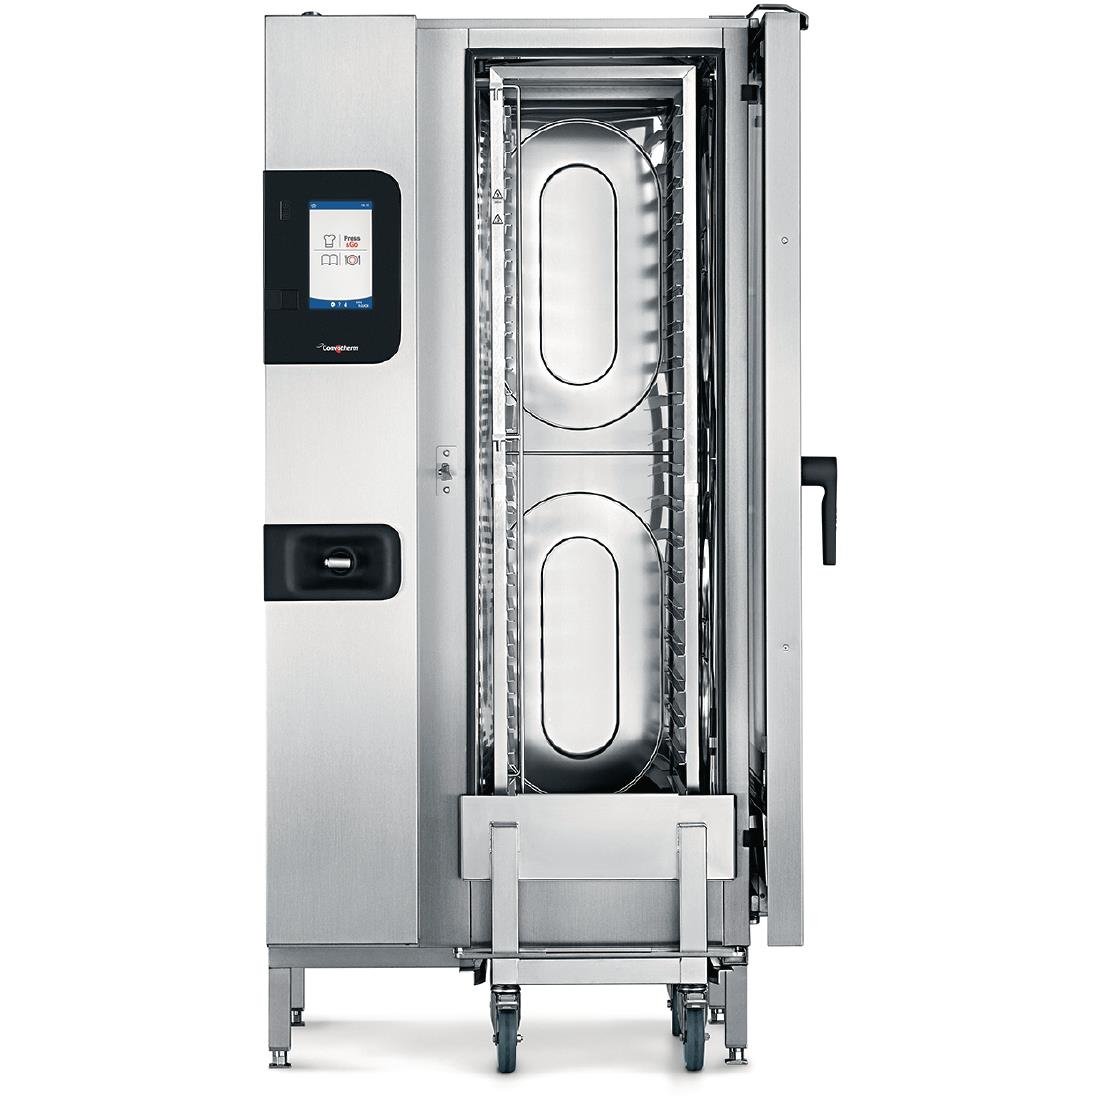 HC259-MO Convotherm 4 easyTouch Combi Oven 20 x 1 x1 GN Grid with ConvoGrill JD Catering Equipment Solutions Ltd